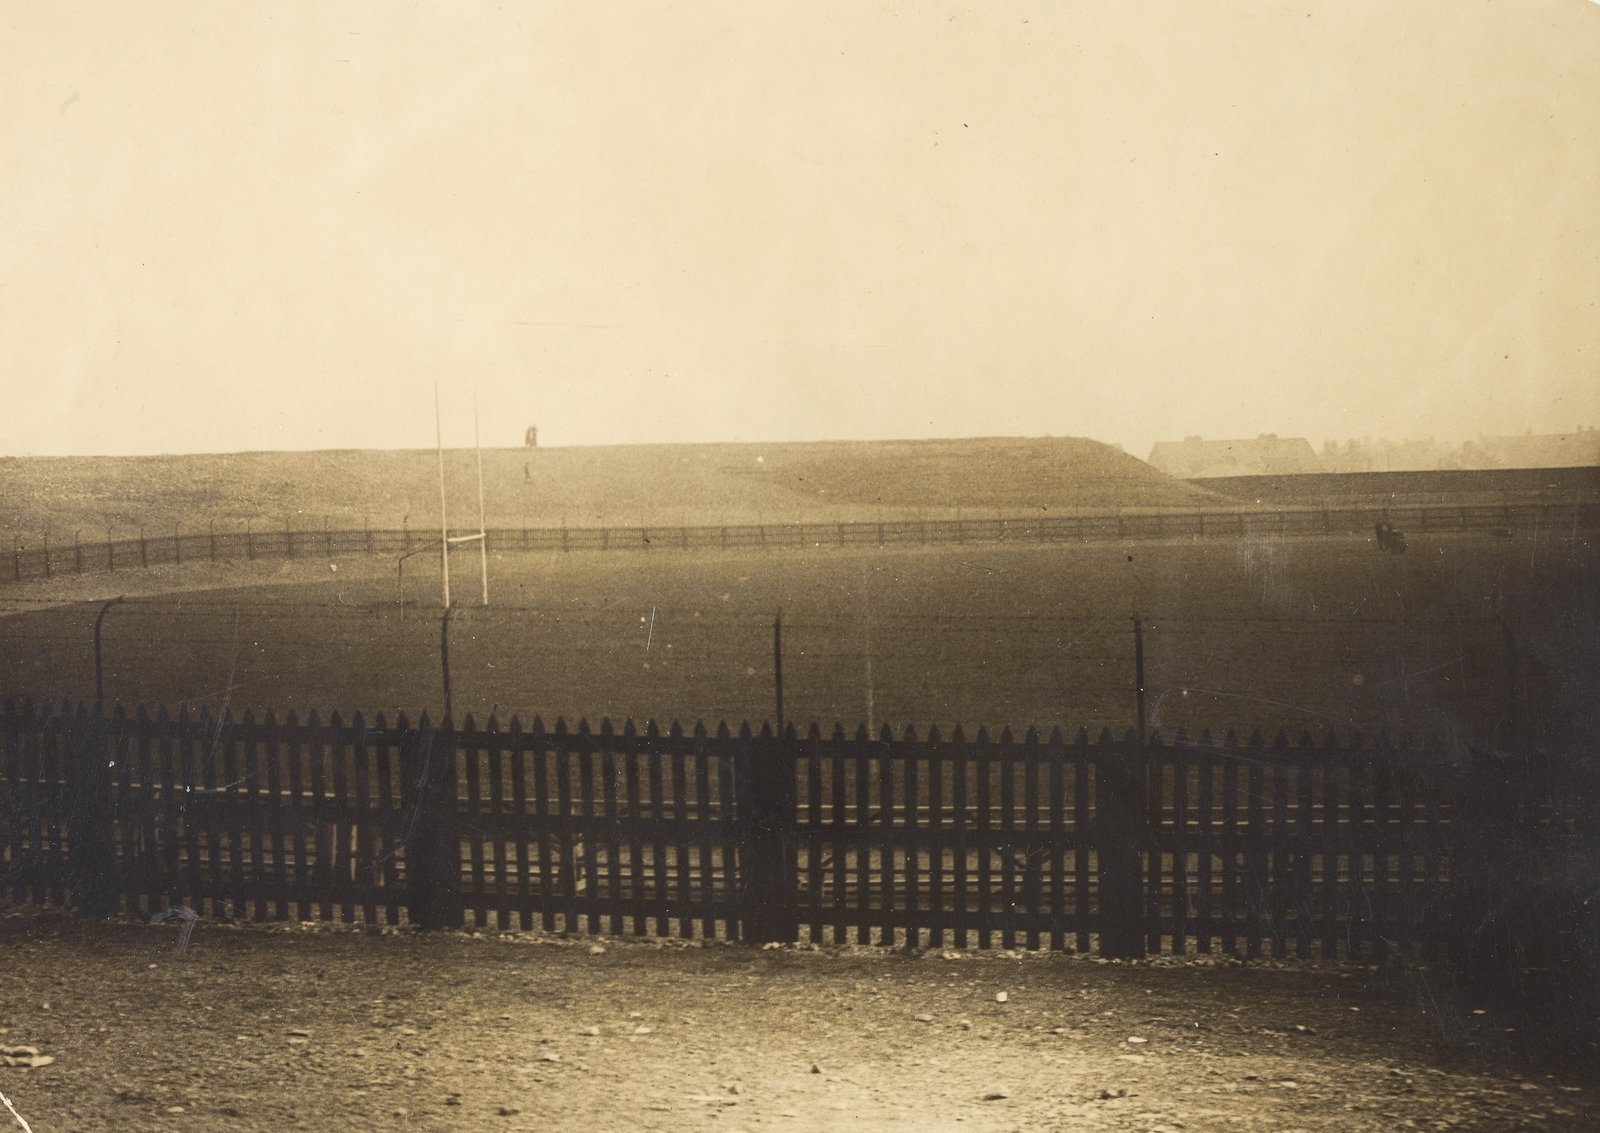 Image - Croke Park on November 22 1920, the day after the massacre. Image courtesy of the National Library of Ireland